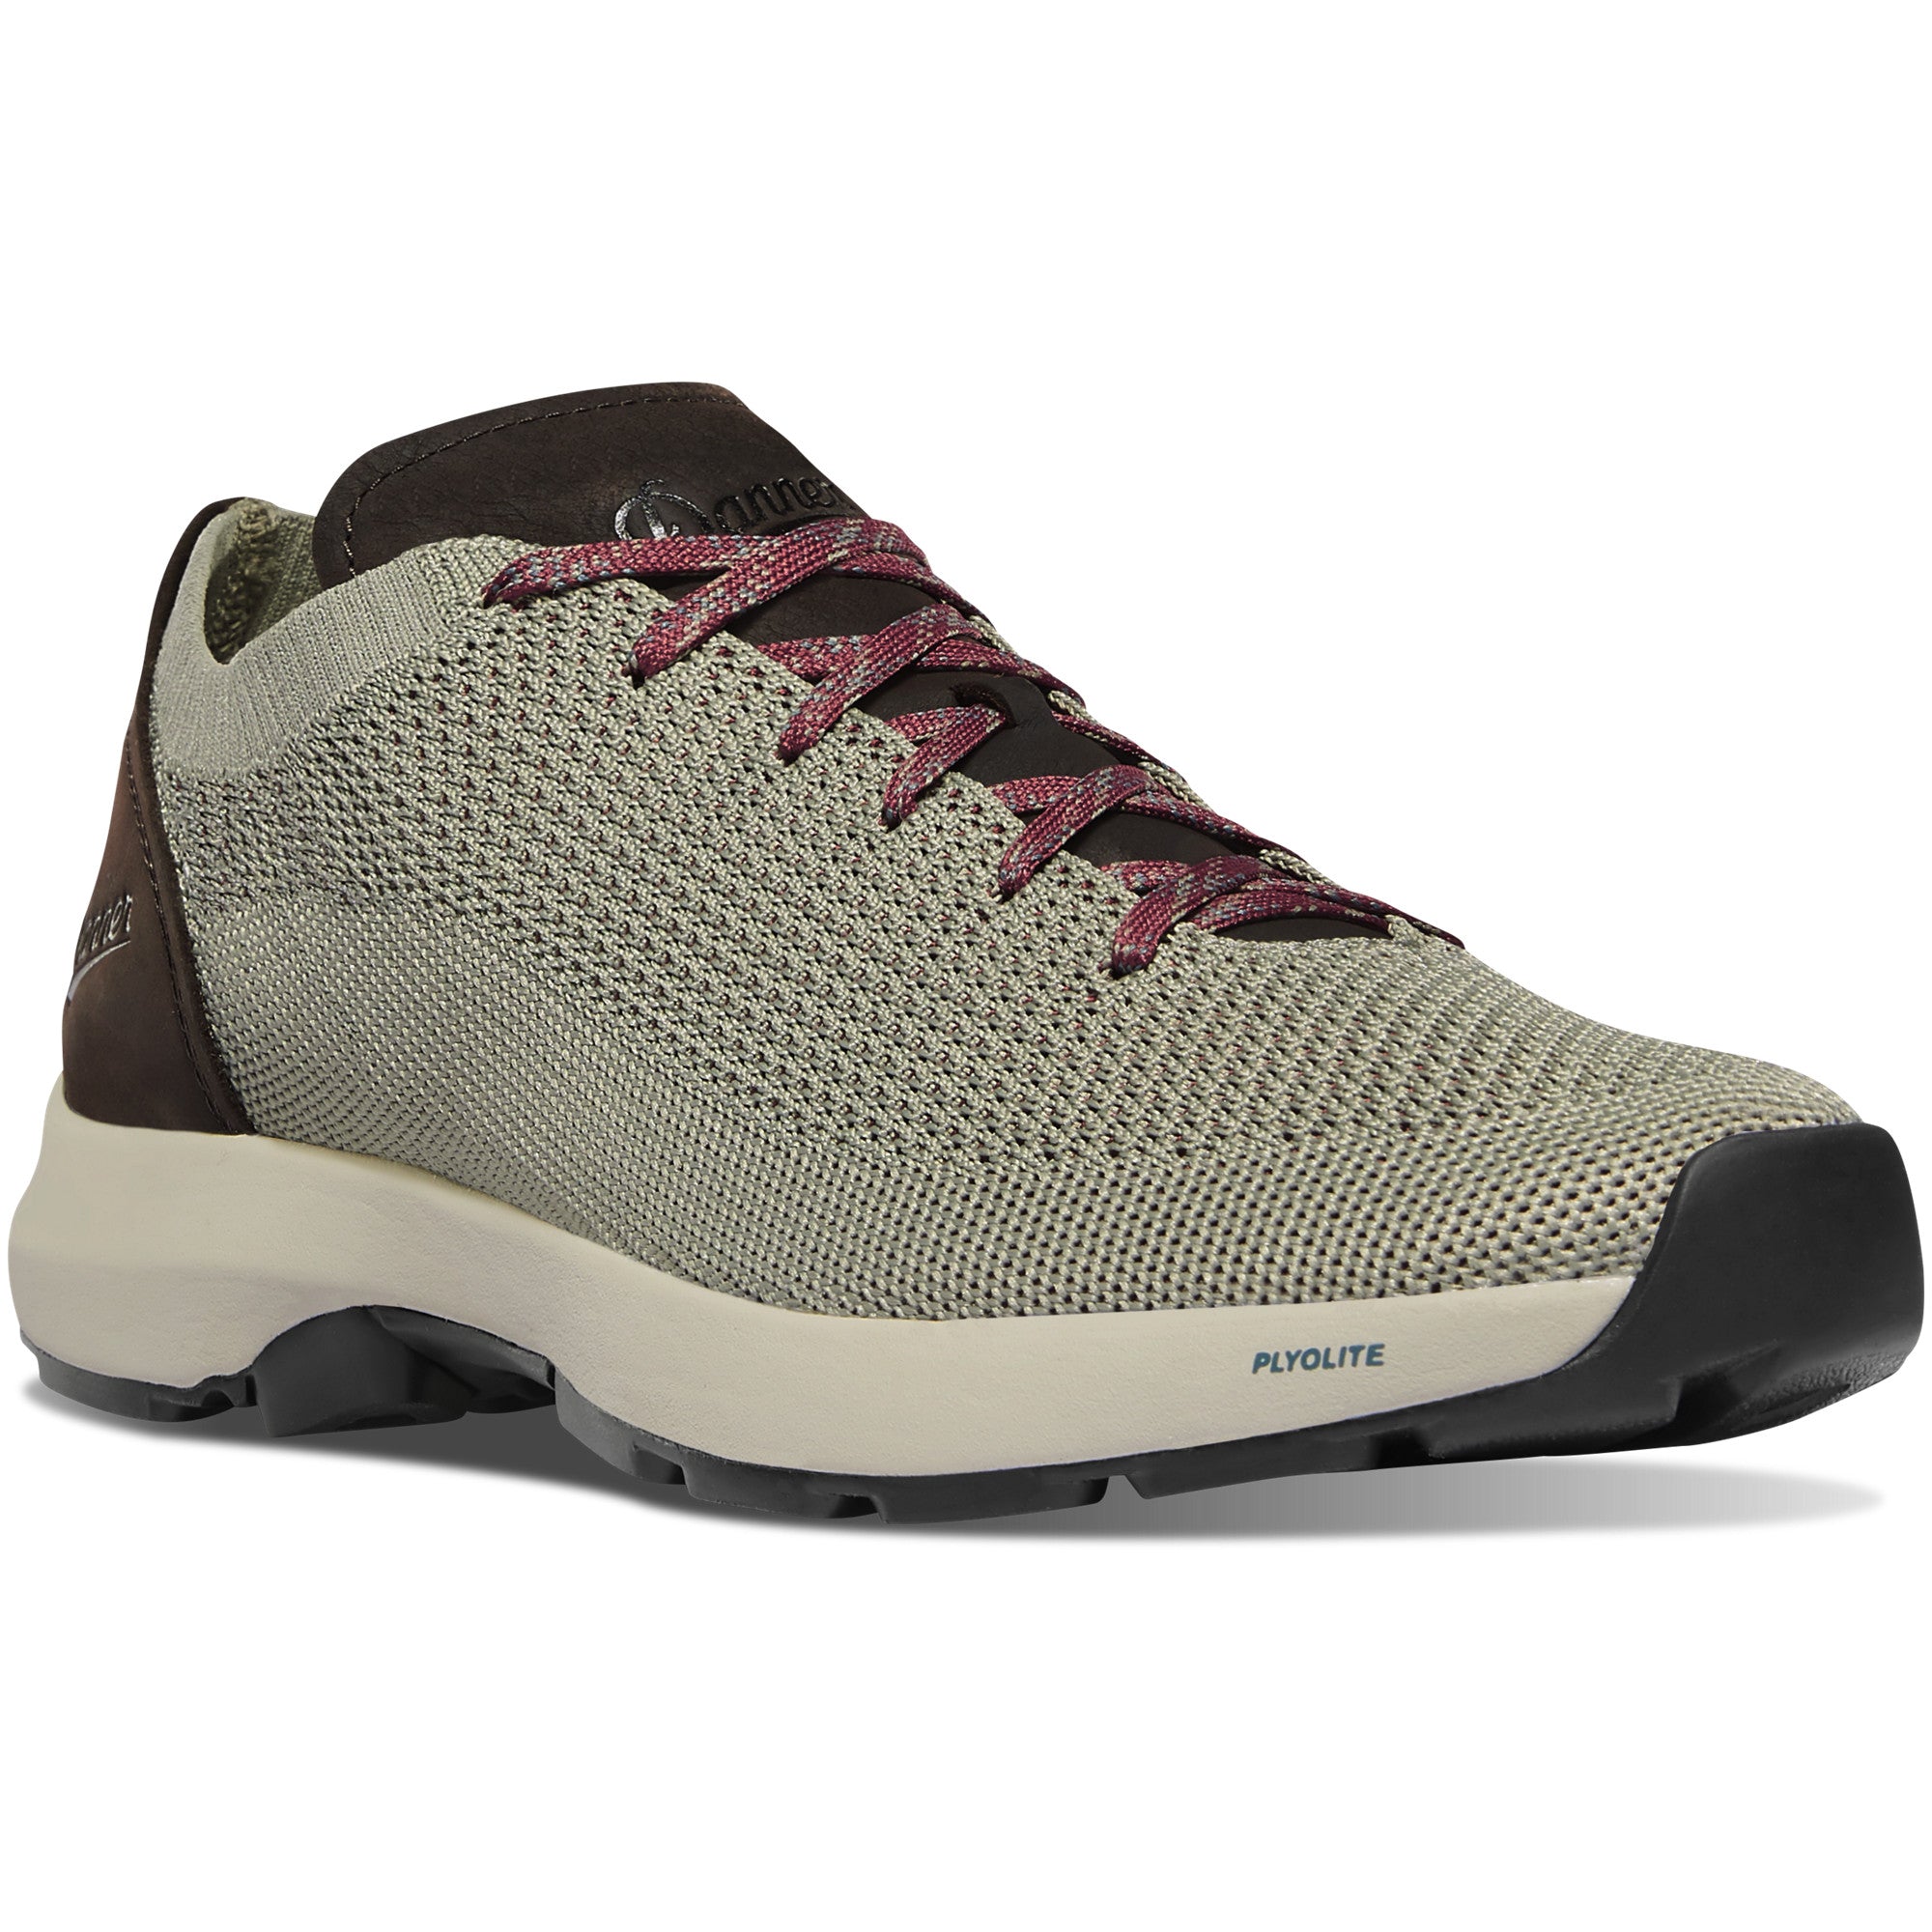 Danner Men's Caprine Low 3" Lifestyle Shoe in Rock Ridge/Sable from the side